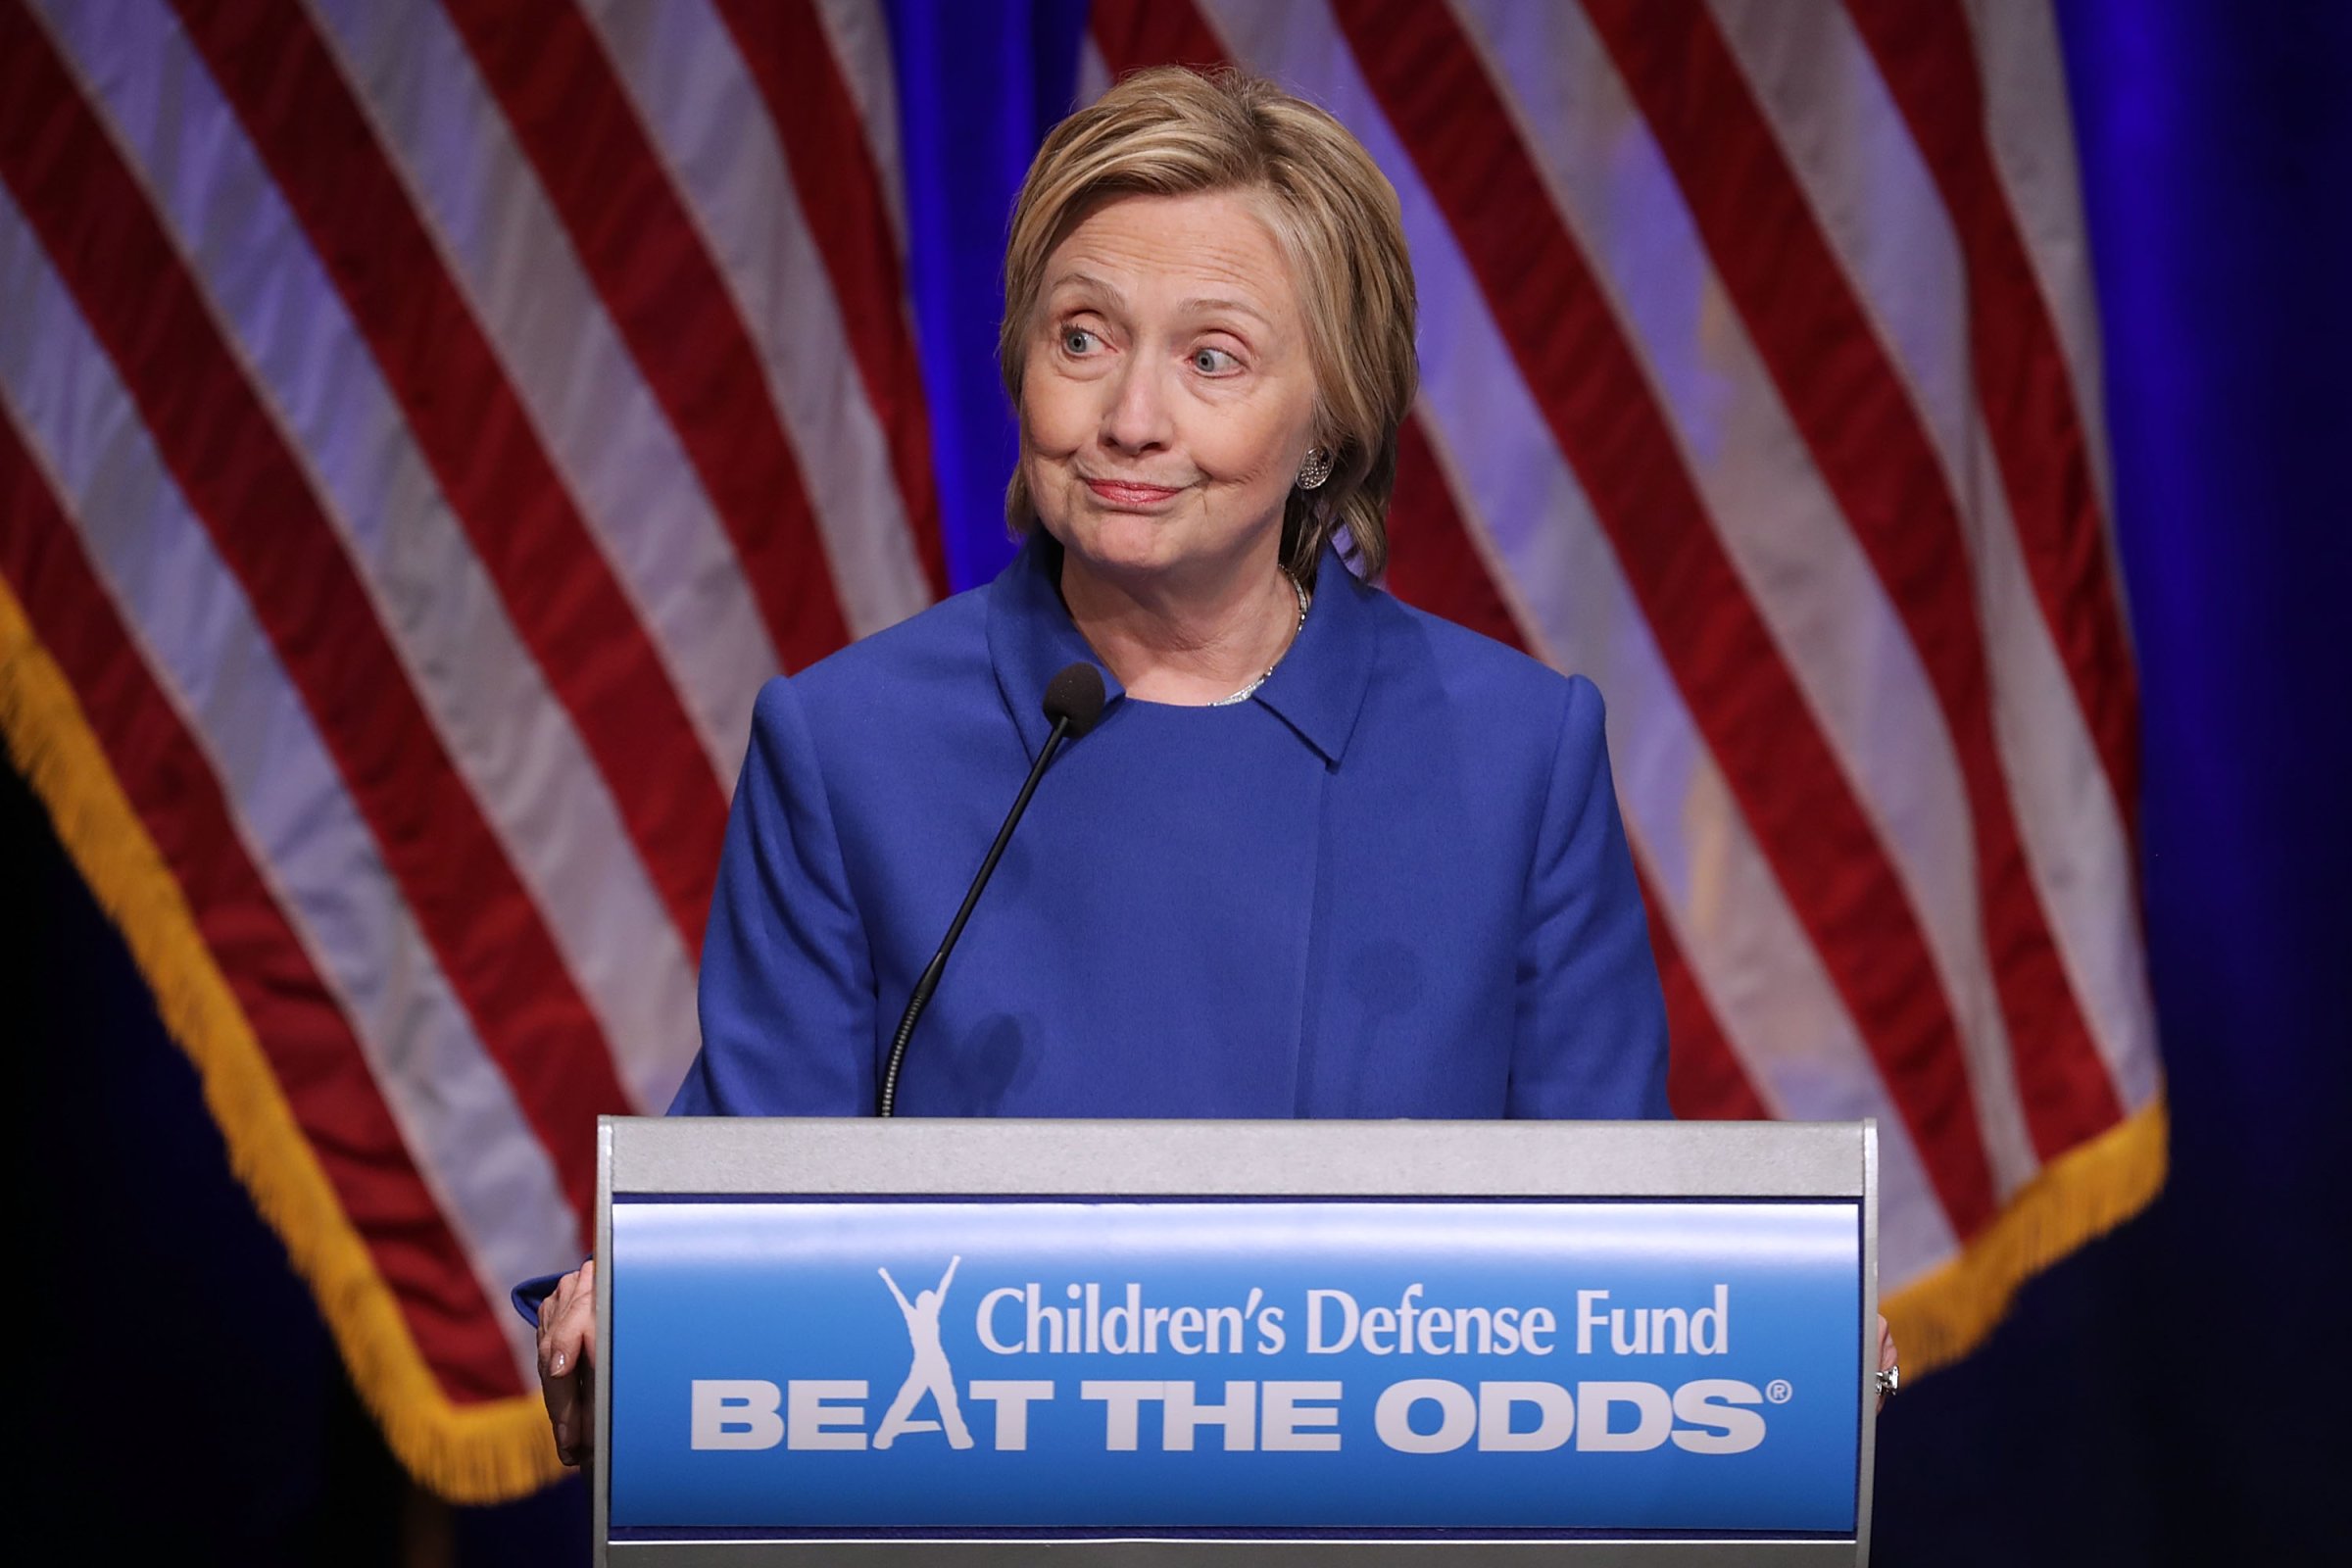 Former Secretary of State Hillary Clinton delivers remarks while being honored during the Children's Defense Fund's Beat the Odds Celebration at the Newseum November 16, 2016 in Washington, DC.